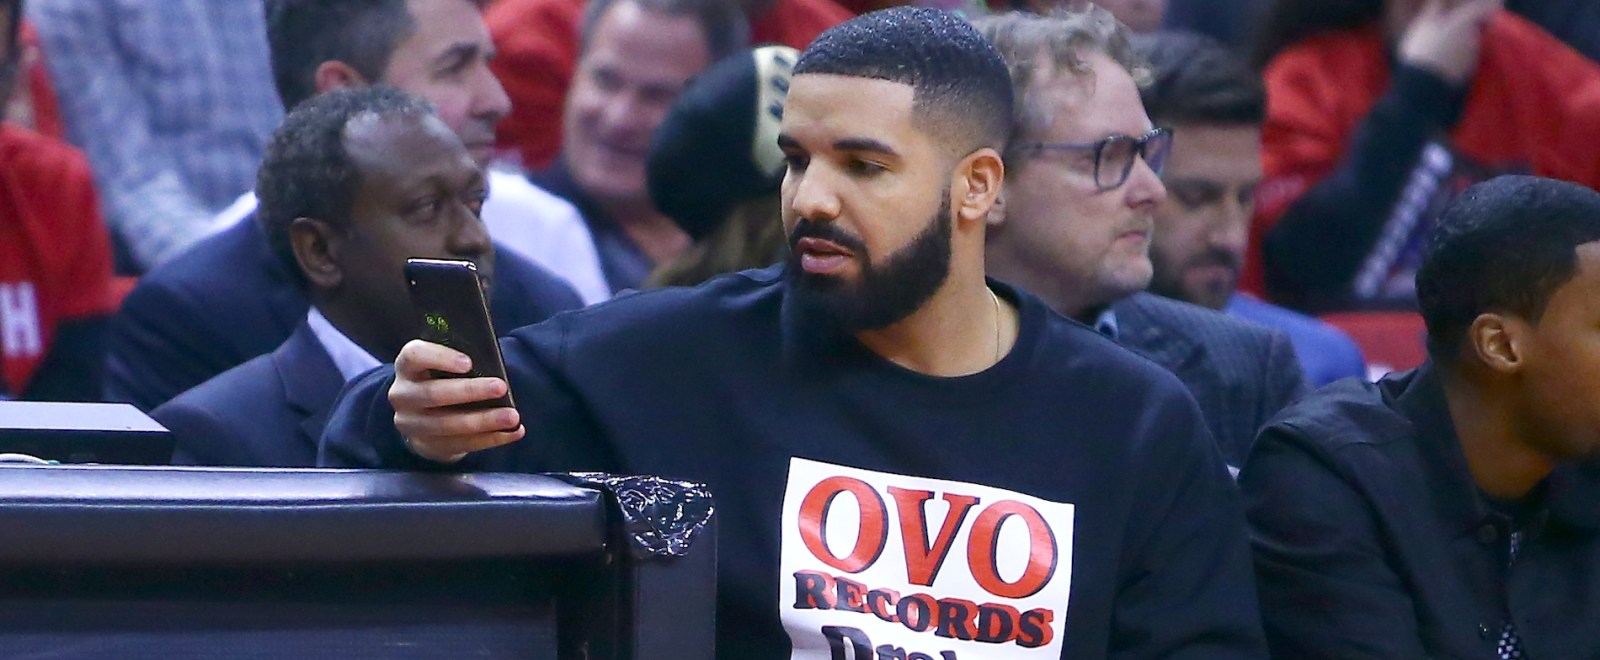 Barcelona Will Put Drake's OVO Owl On Jerseys For El Clasico